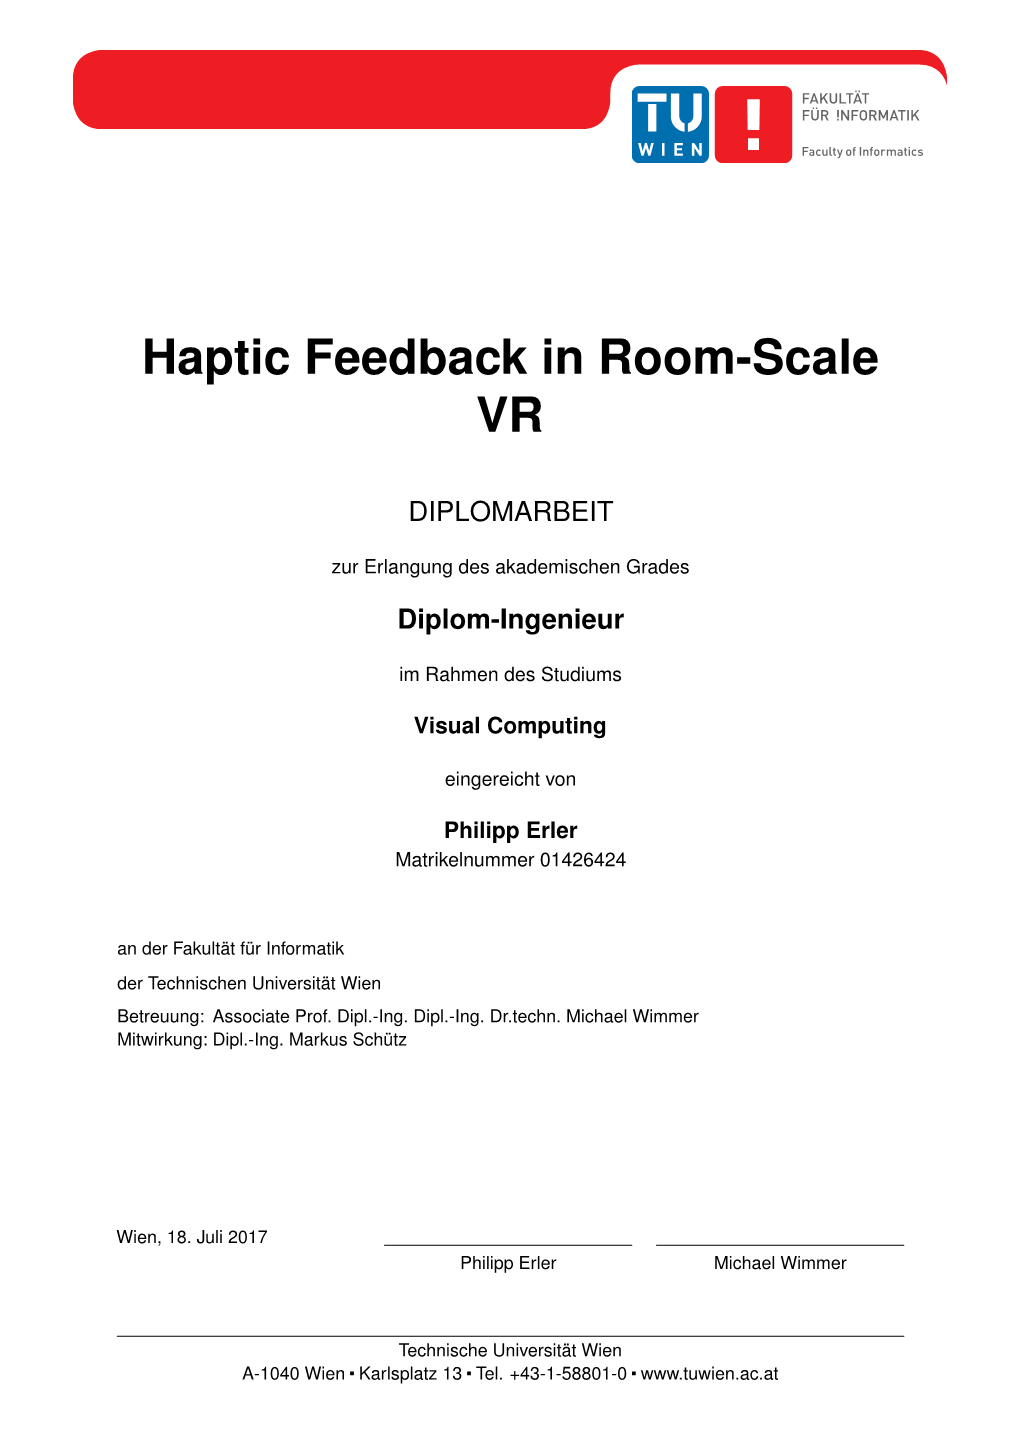 Haptic Feedback in Room-Scale VR